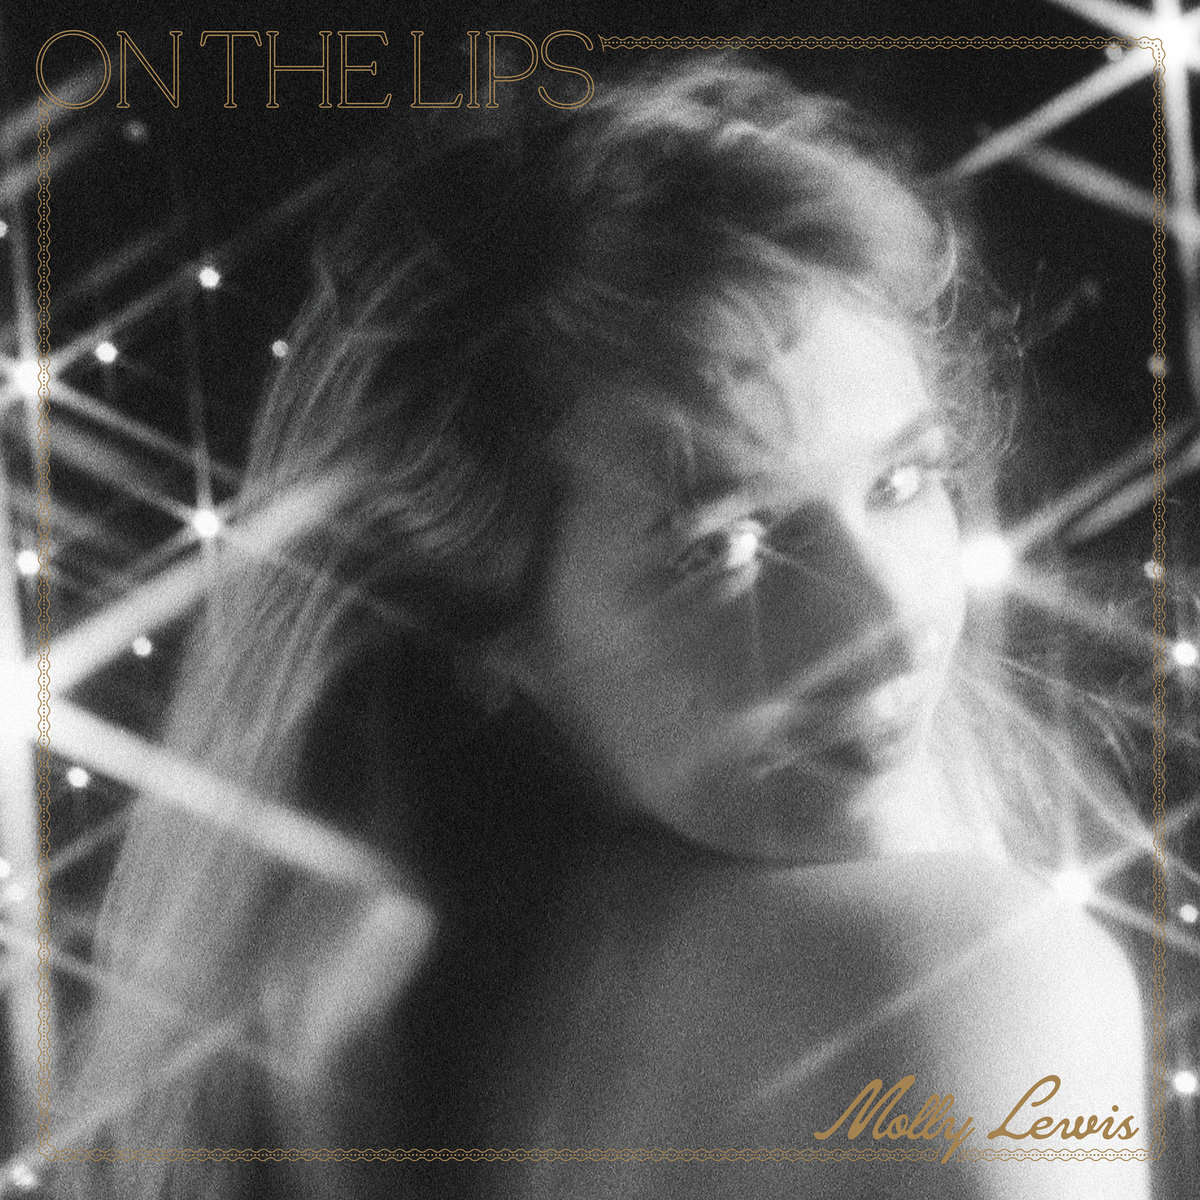 MOLLY LEWIS - ON THE LIPS - LP EDITION LIMITEE EXCLUSIVITE DISQUAIRES INDES